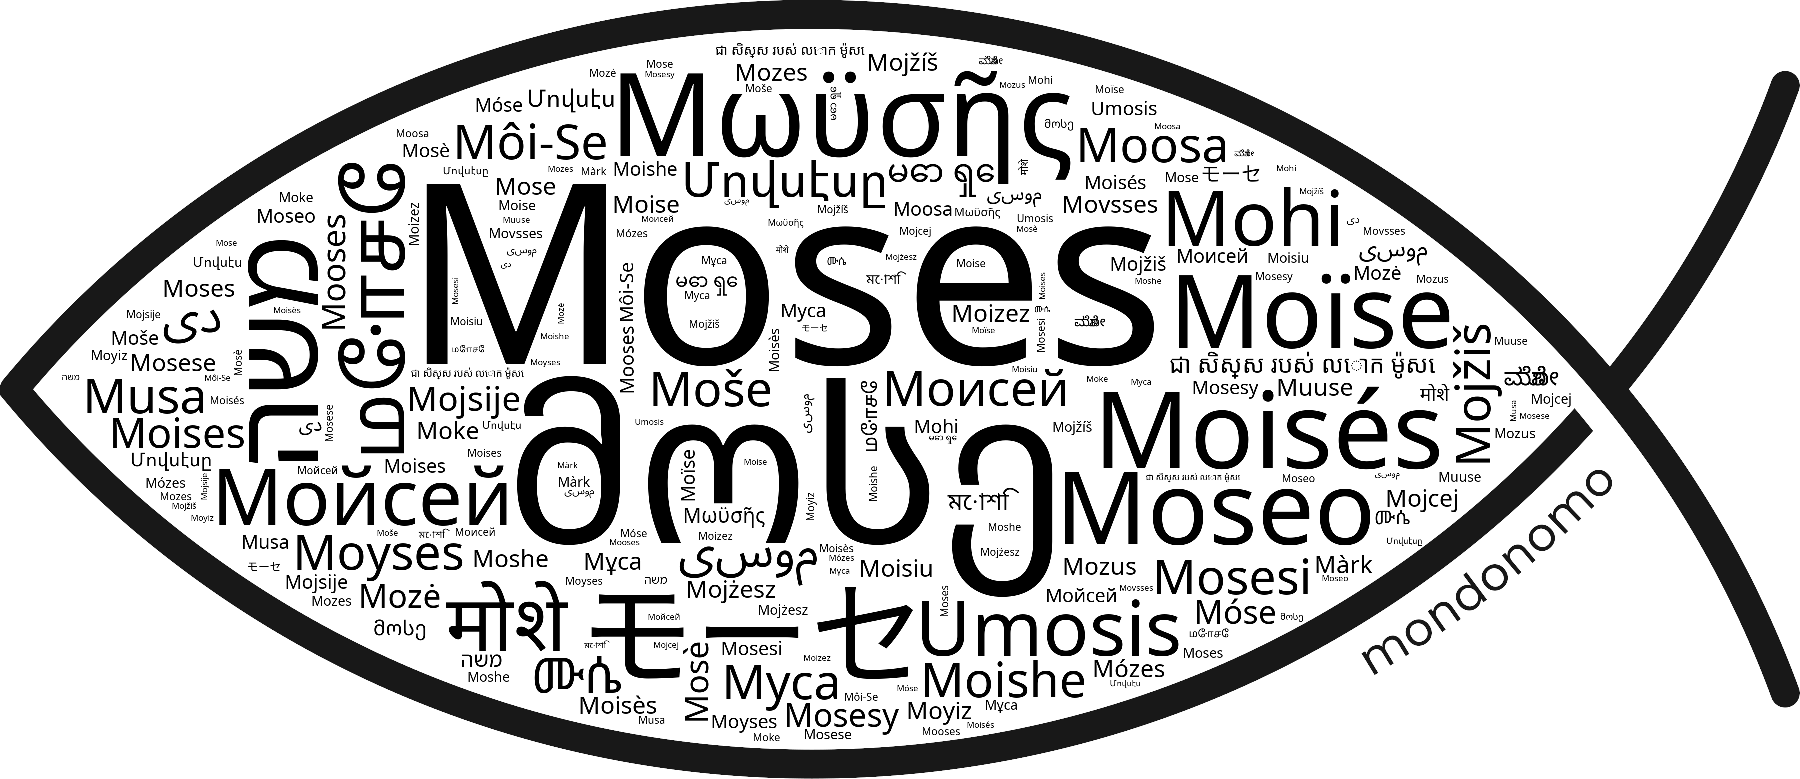 Name Moses in the world's Bibles